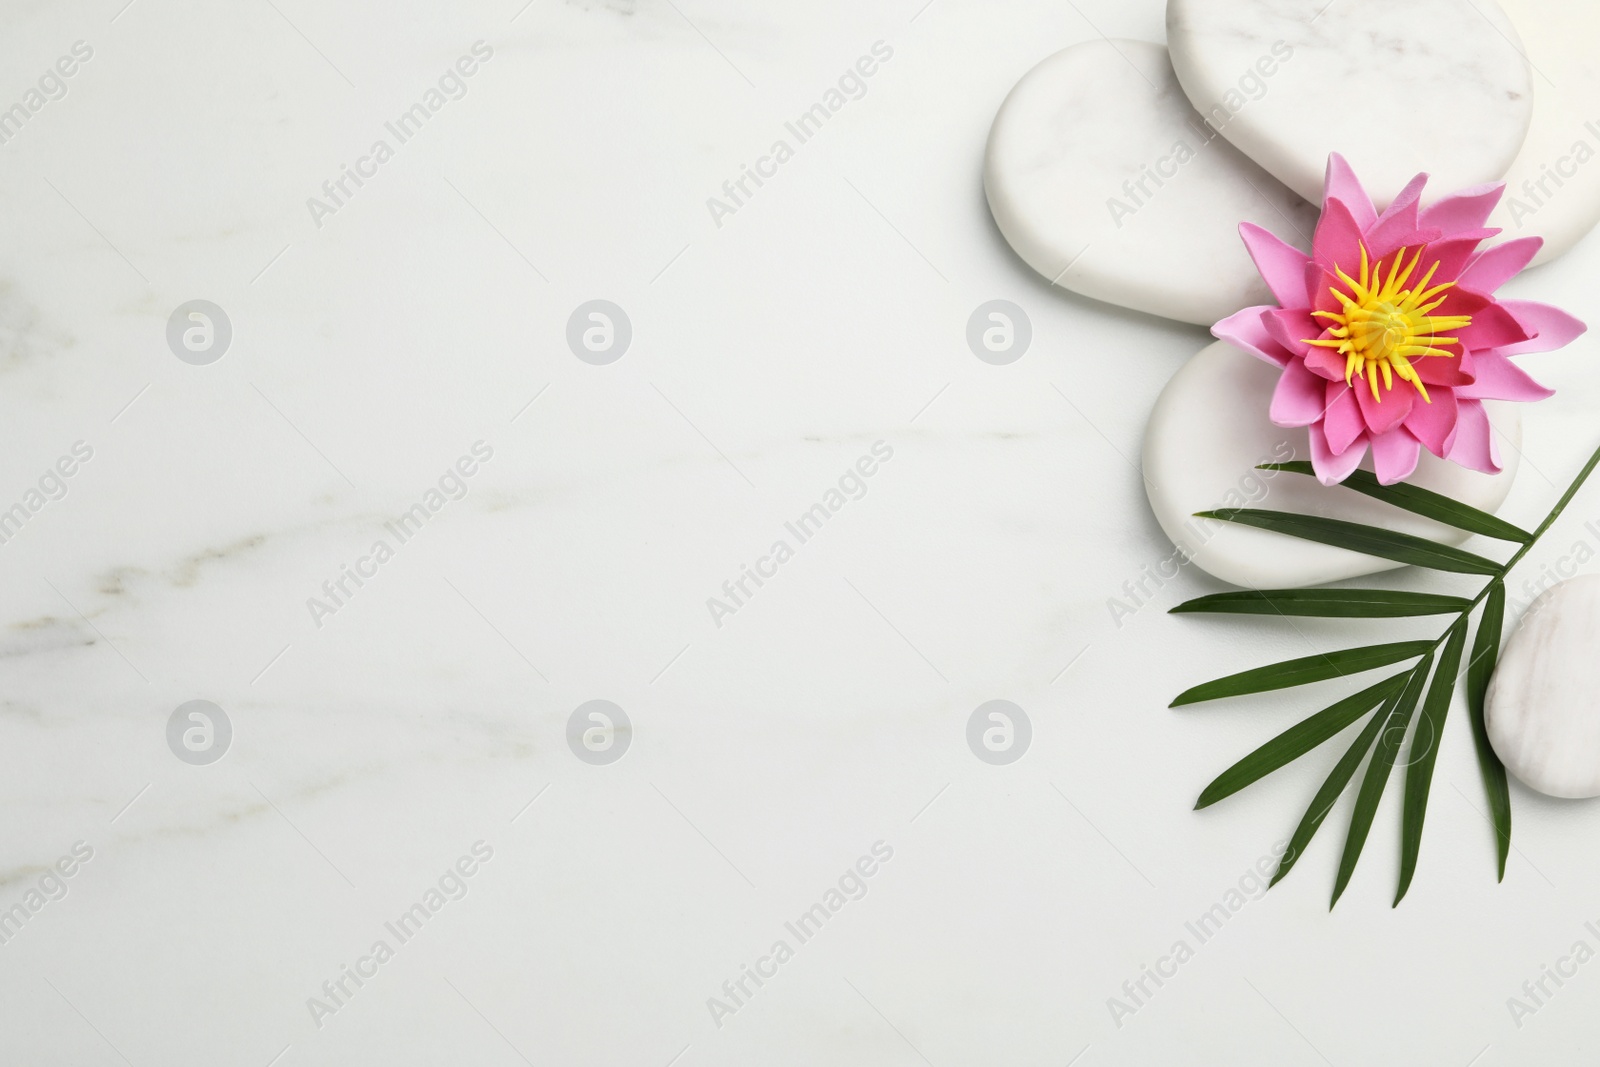 Photo of Flat lay composition with spa stones, lotus flower and leaf on white marble table. Space for text